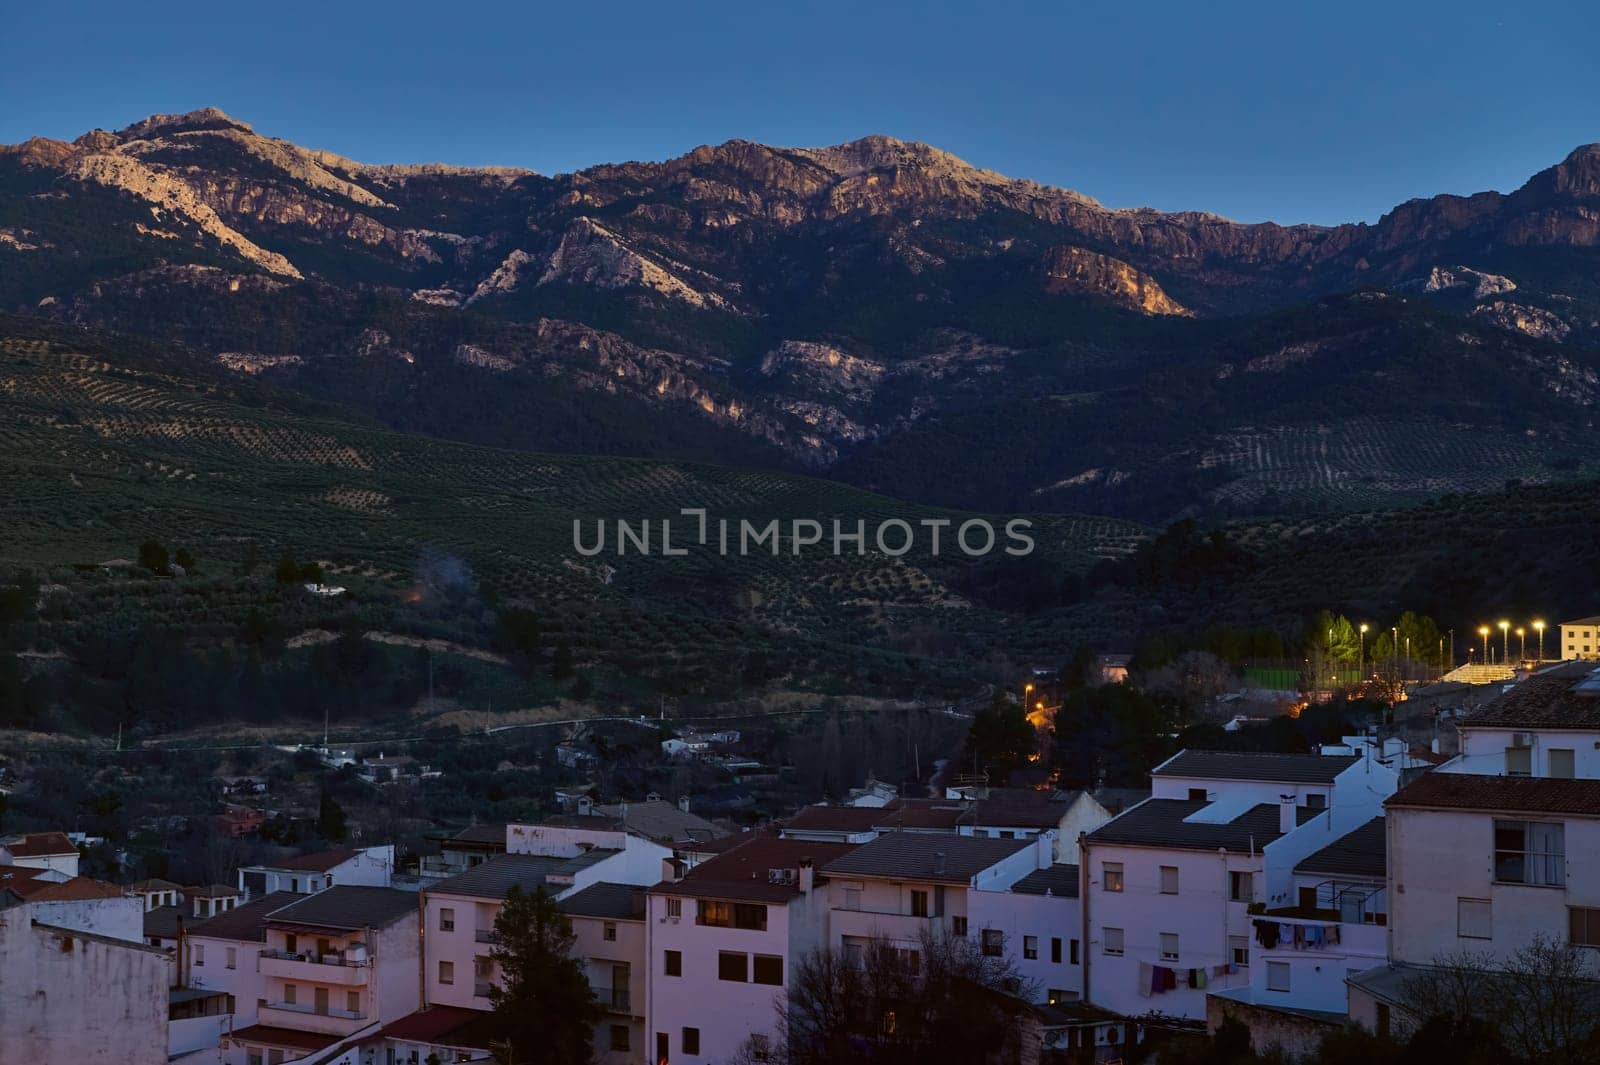 View of a famous beautiful medieval and historic Spanish city Quesada in province of Jaen in Andalusia, illuminated with street lights in the night time. Lifestyle, Travel and tourism concept.